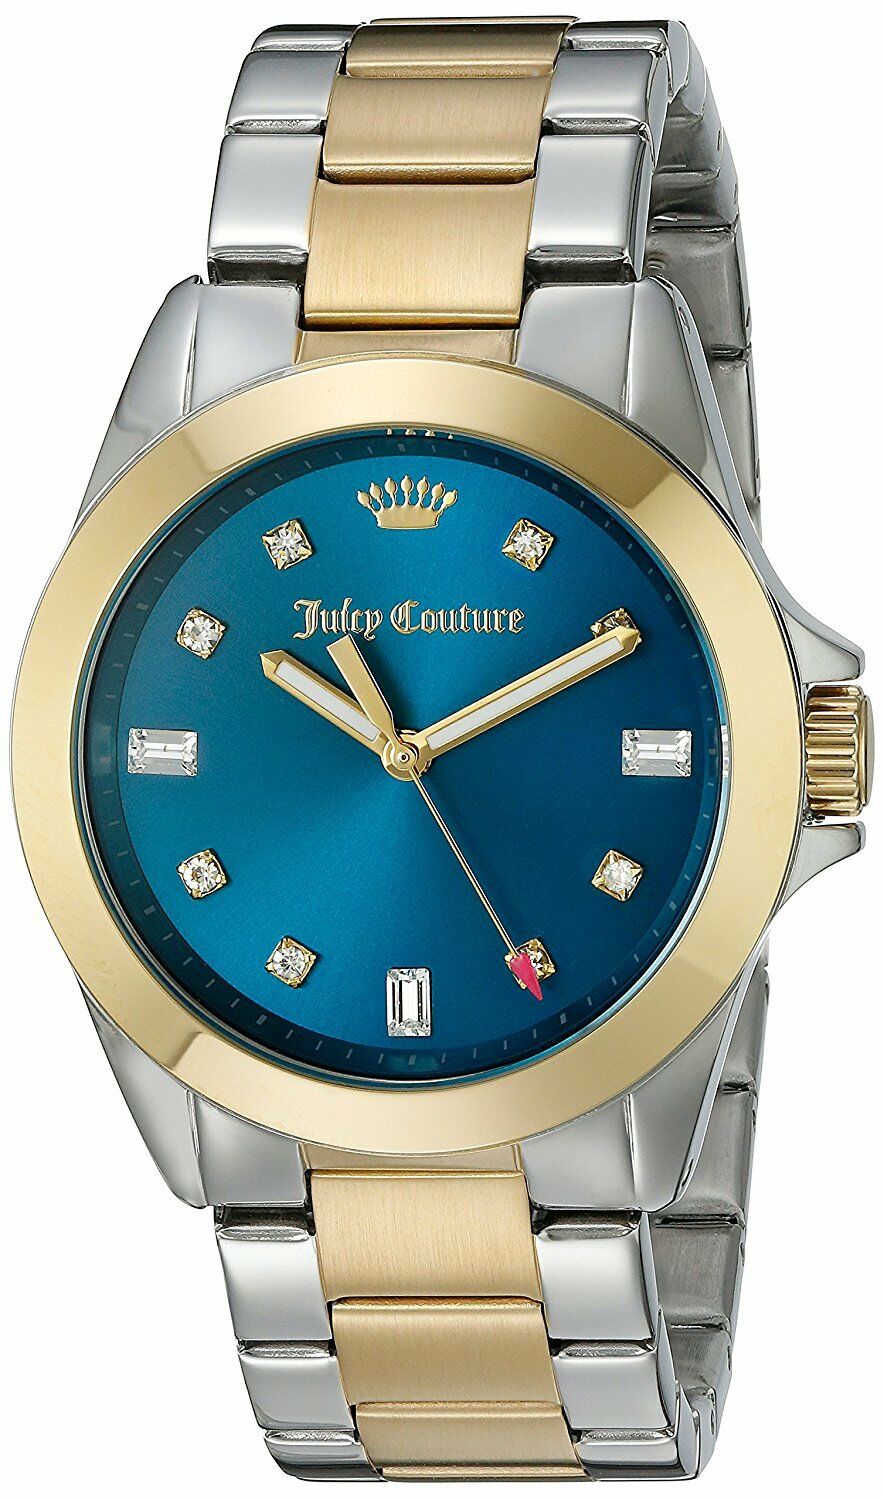 Juicy Couture Malibu Gold Silver Two Tone Teal Runway Bracelet Watch 1901283